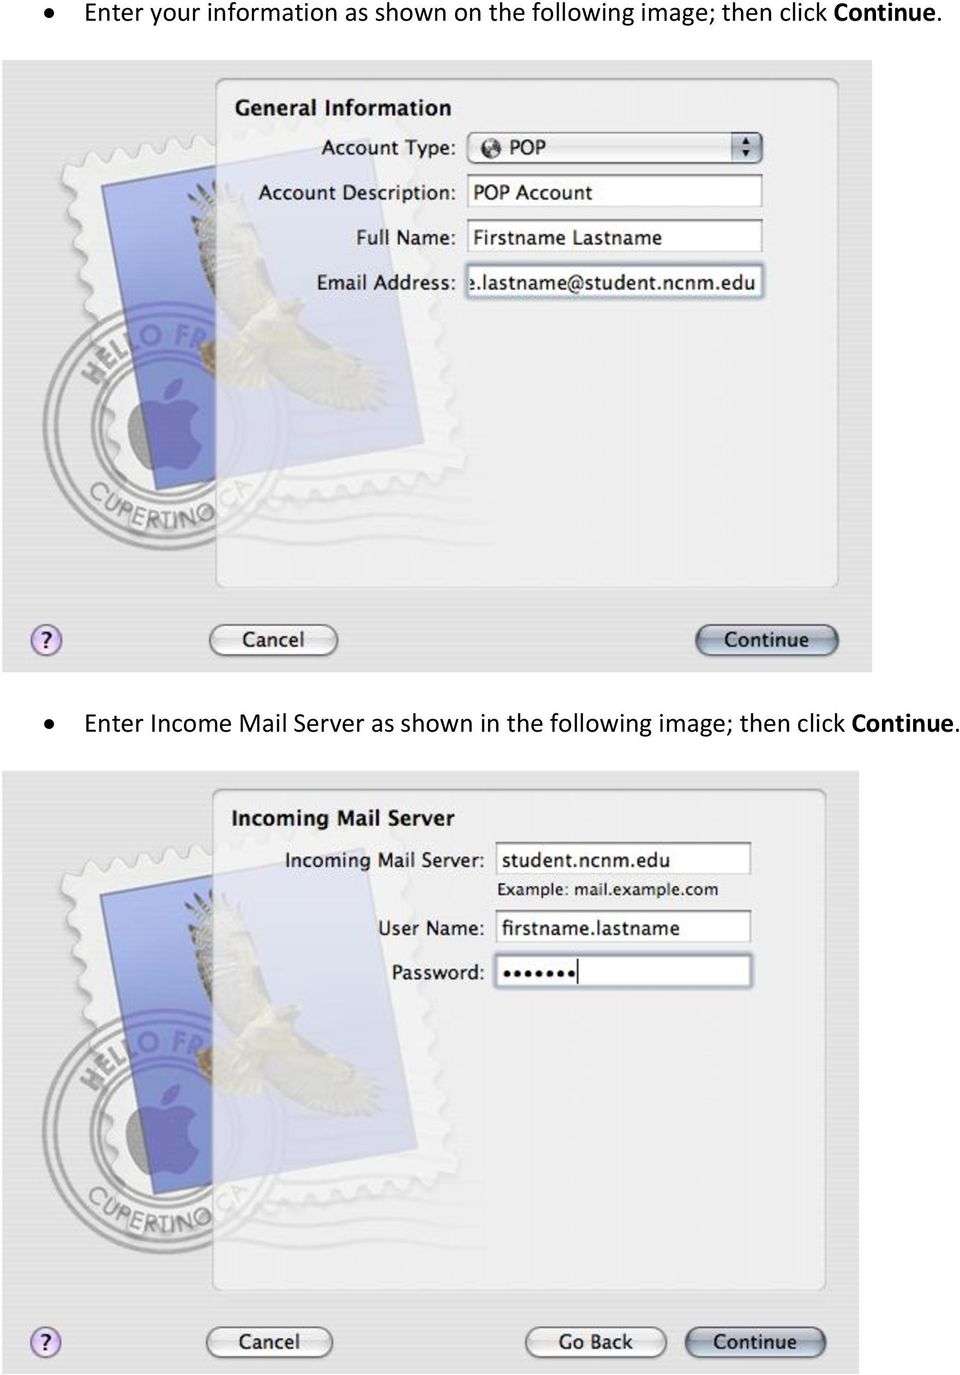 Enter Income Mail Server as shown in